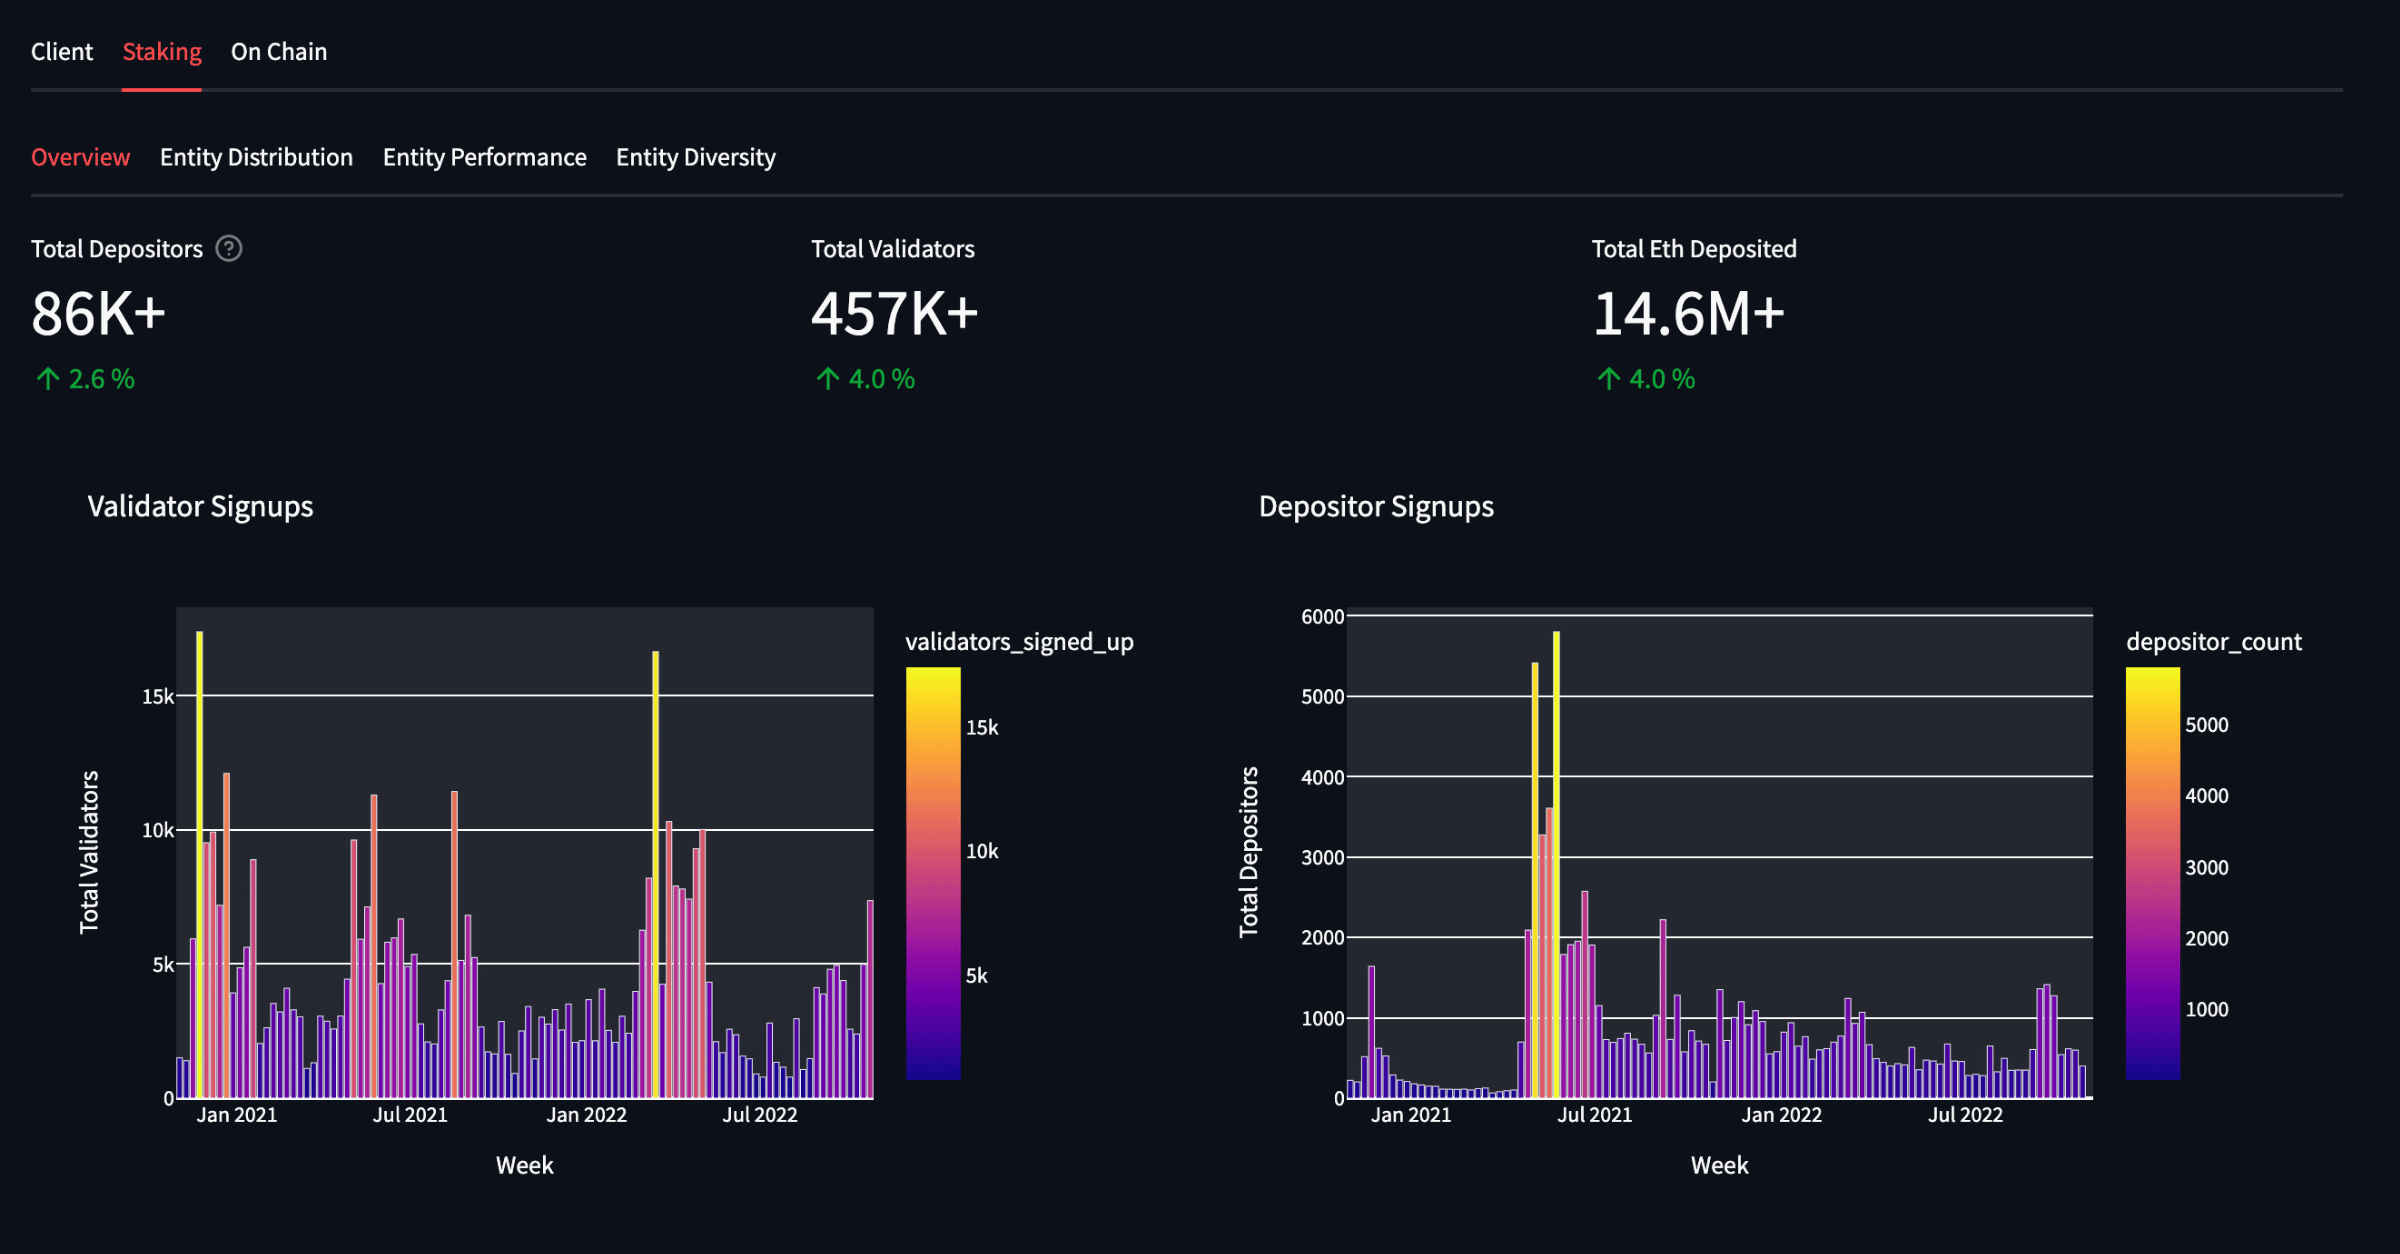 Staking Overview